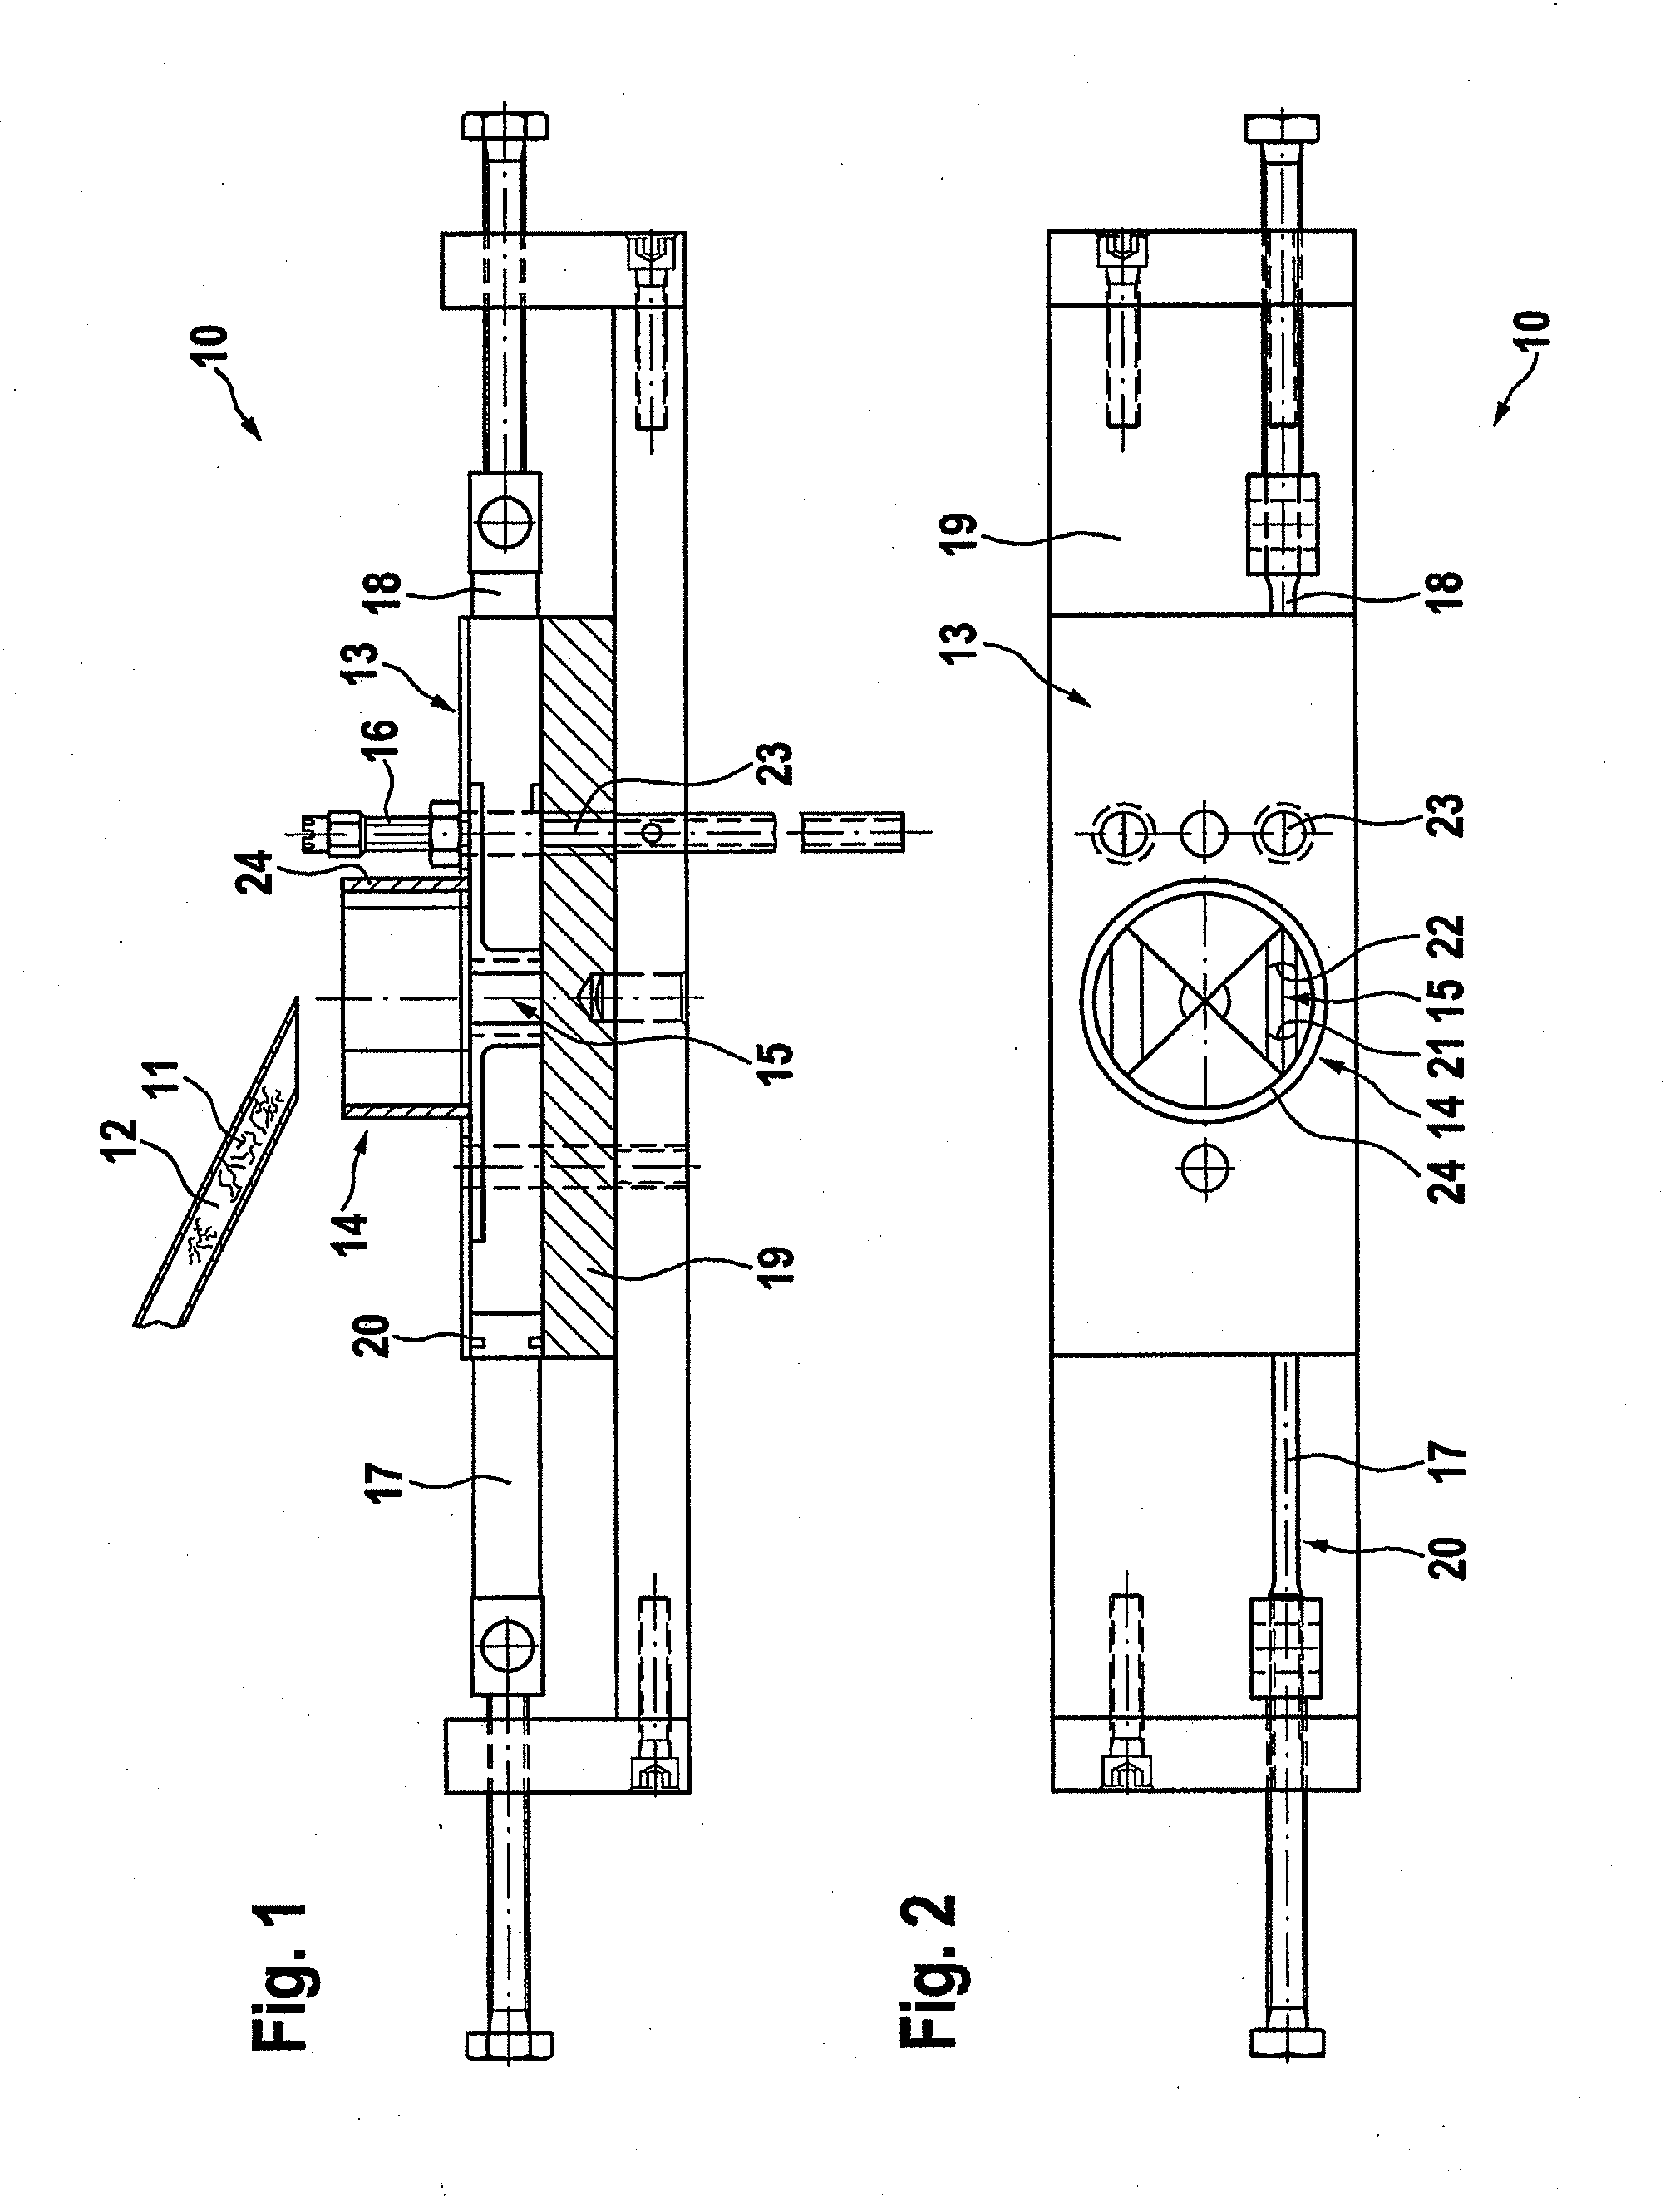 Device and method for metering tobacco in portions suitable for packaging